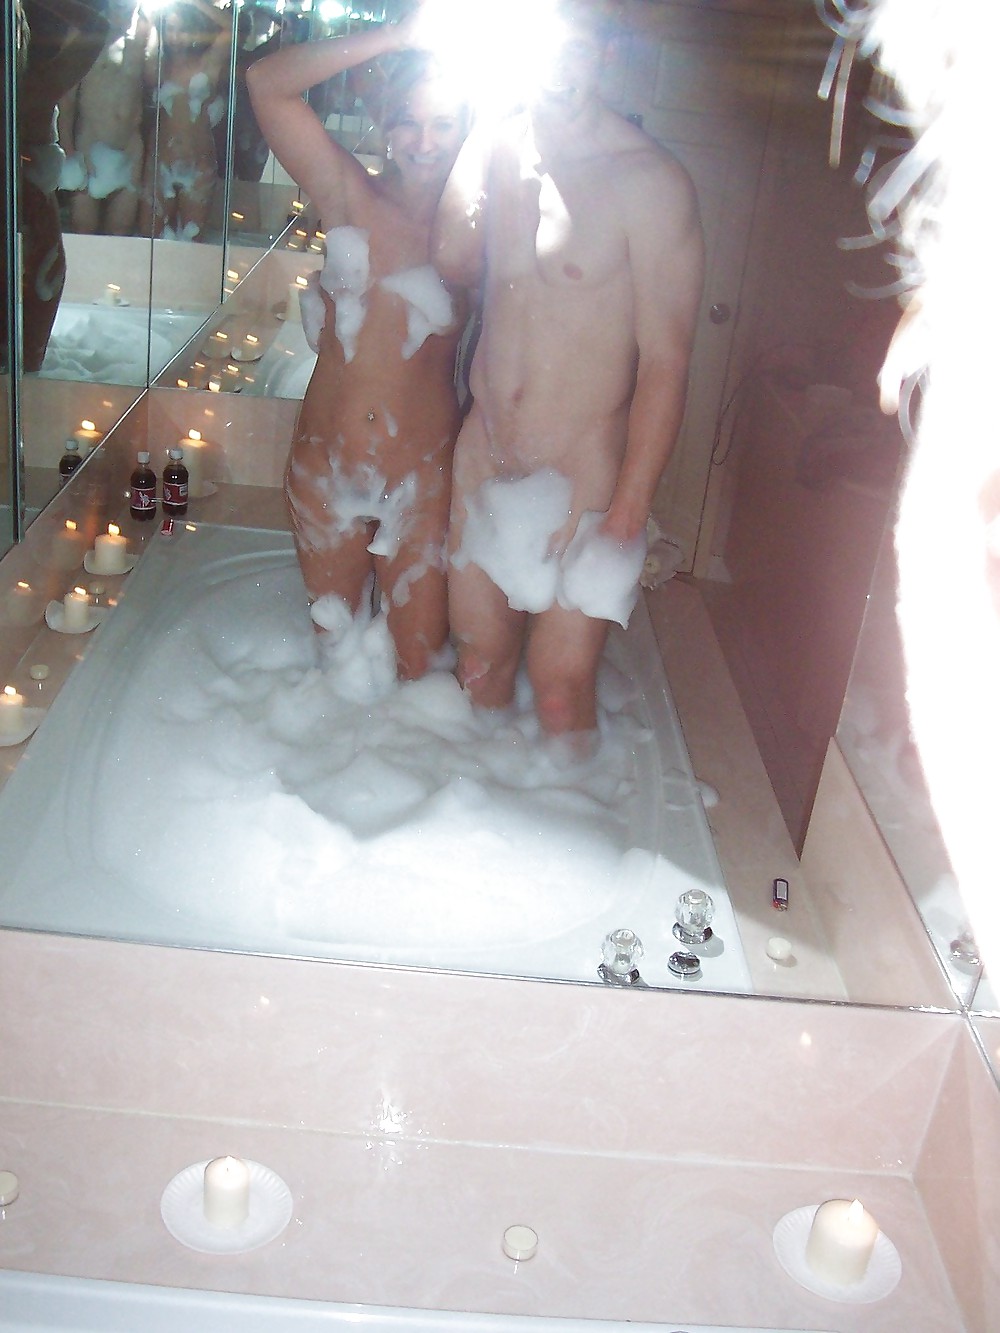 Couple having fun in the bath porn pictures